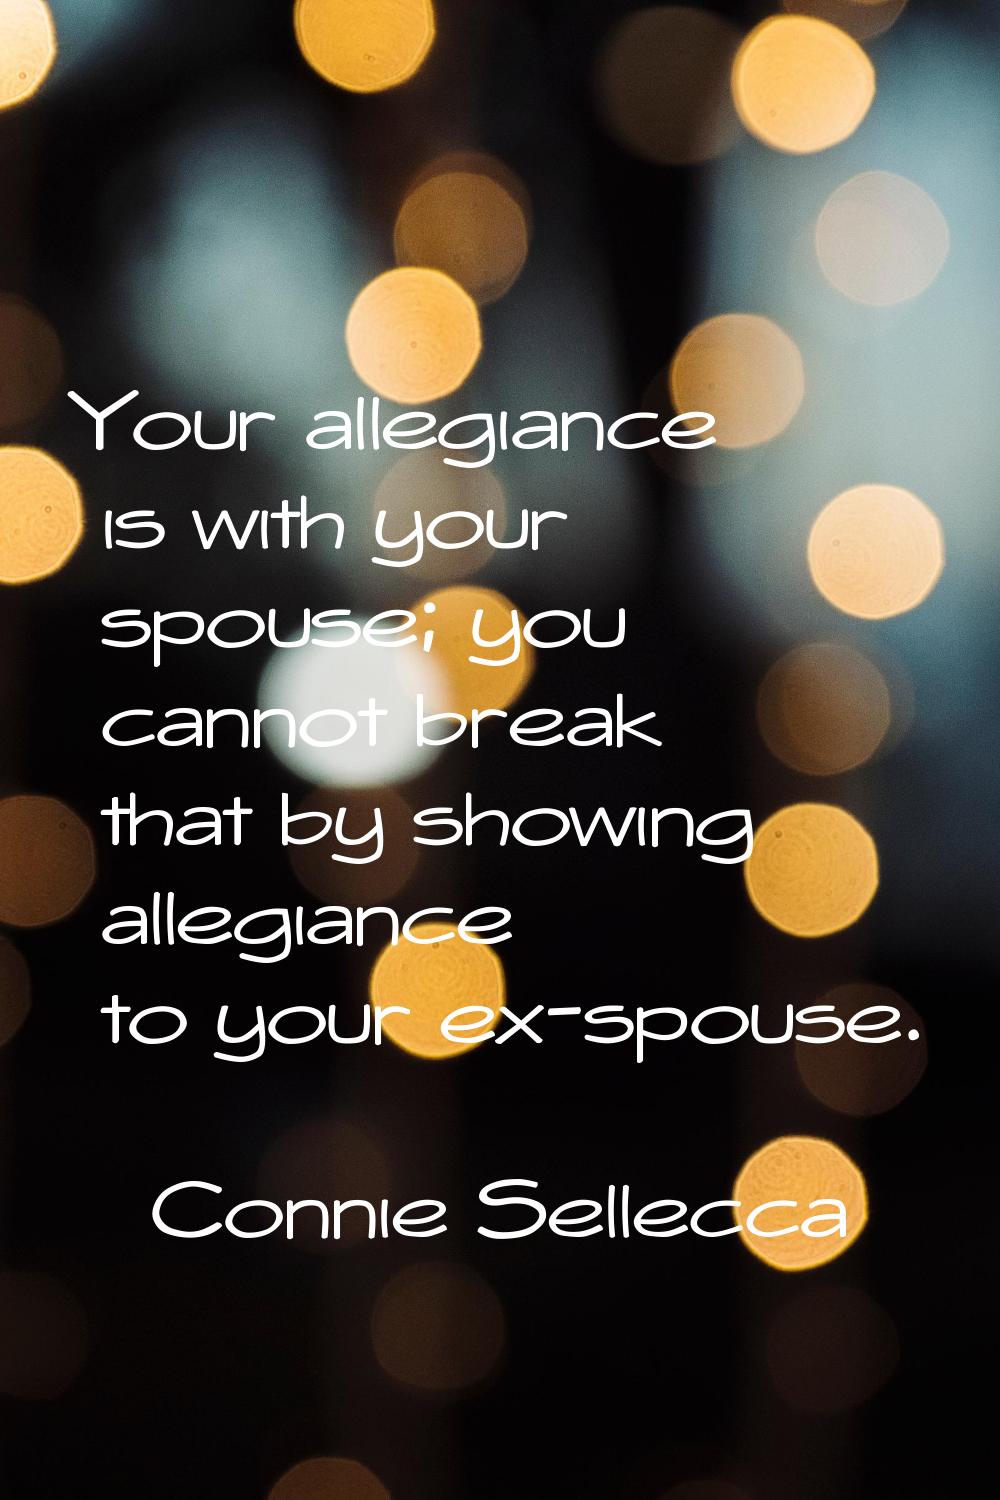 Your allegiance is with your spouse; you cannot break that by showing allegiance to your ex-spouse.